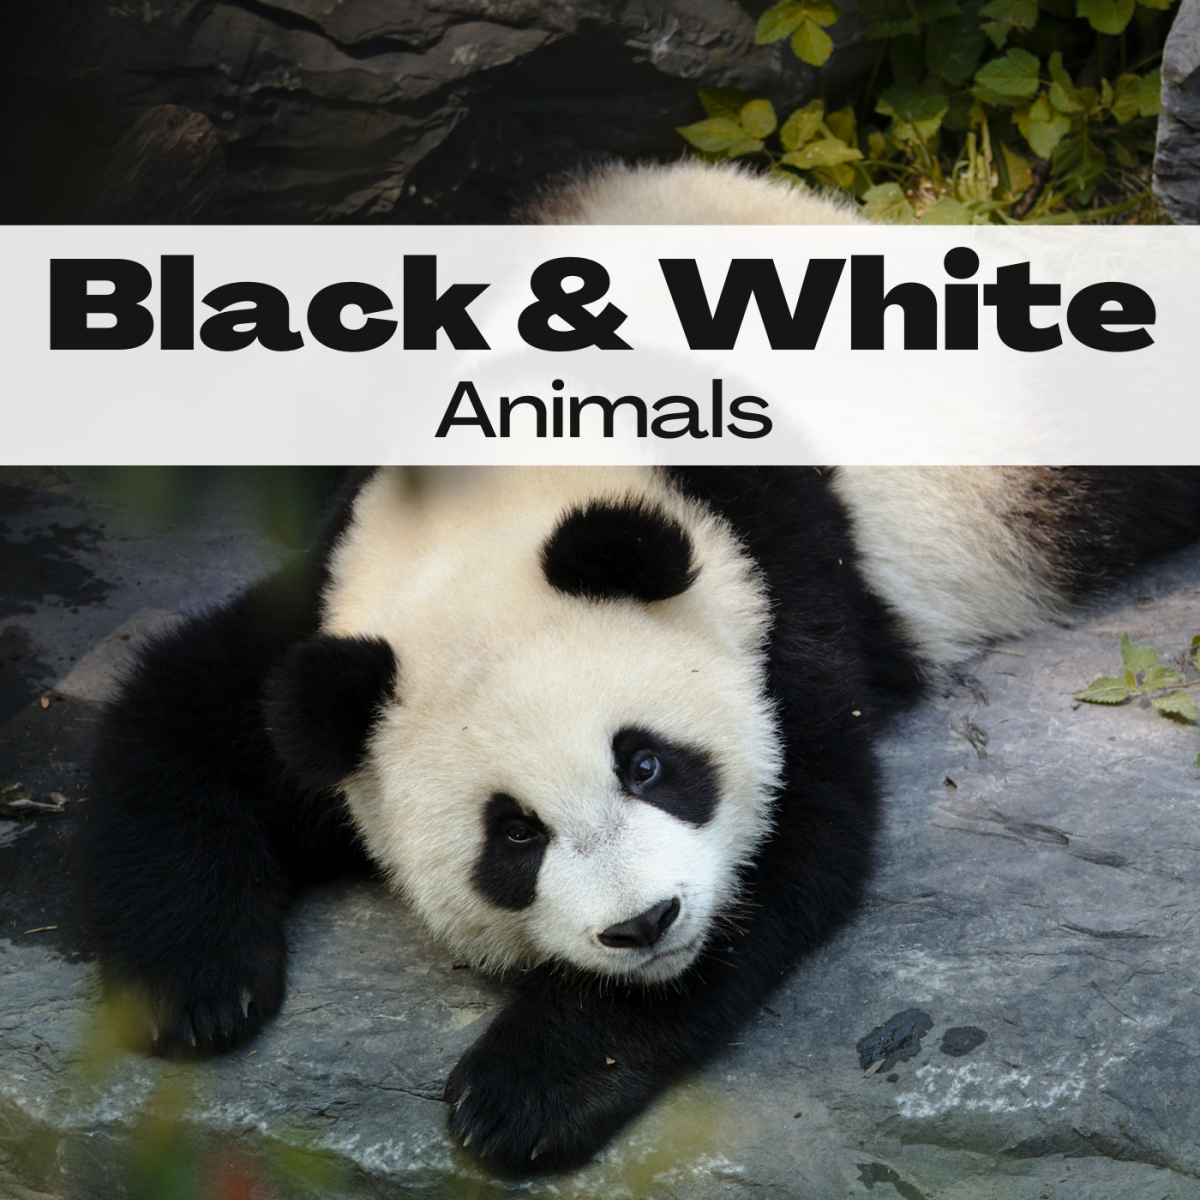 15 Black and White Animals (With Photos)